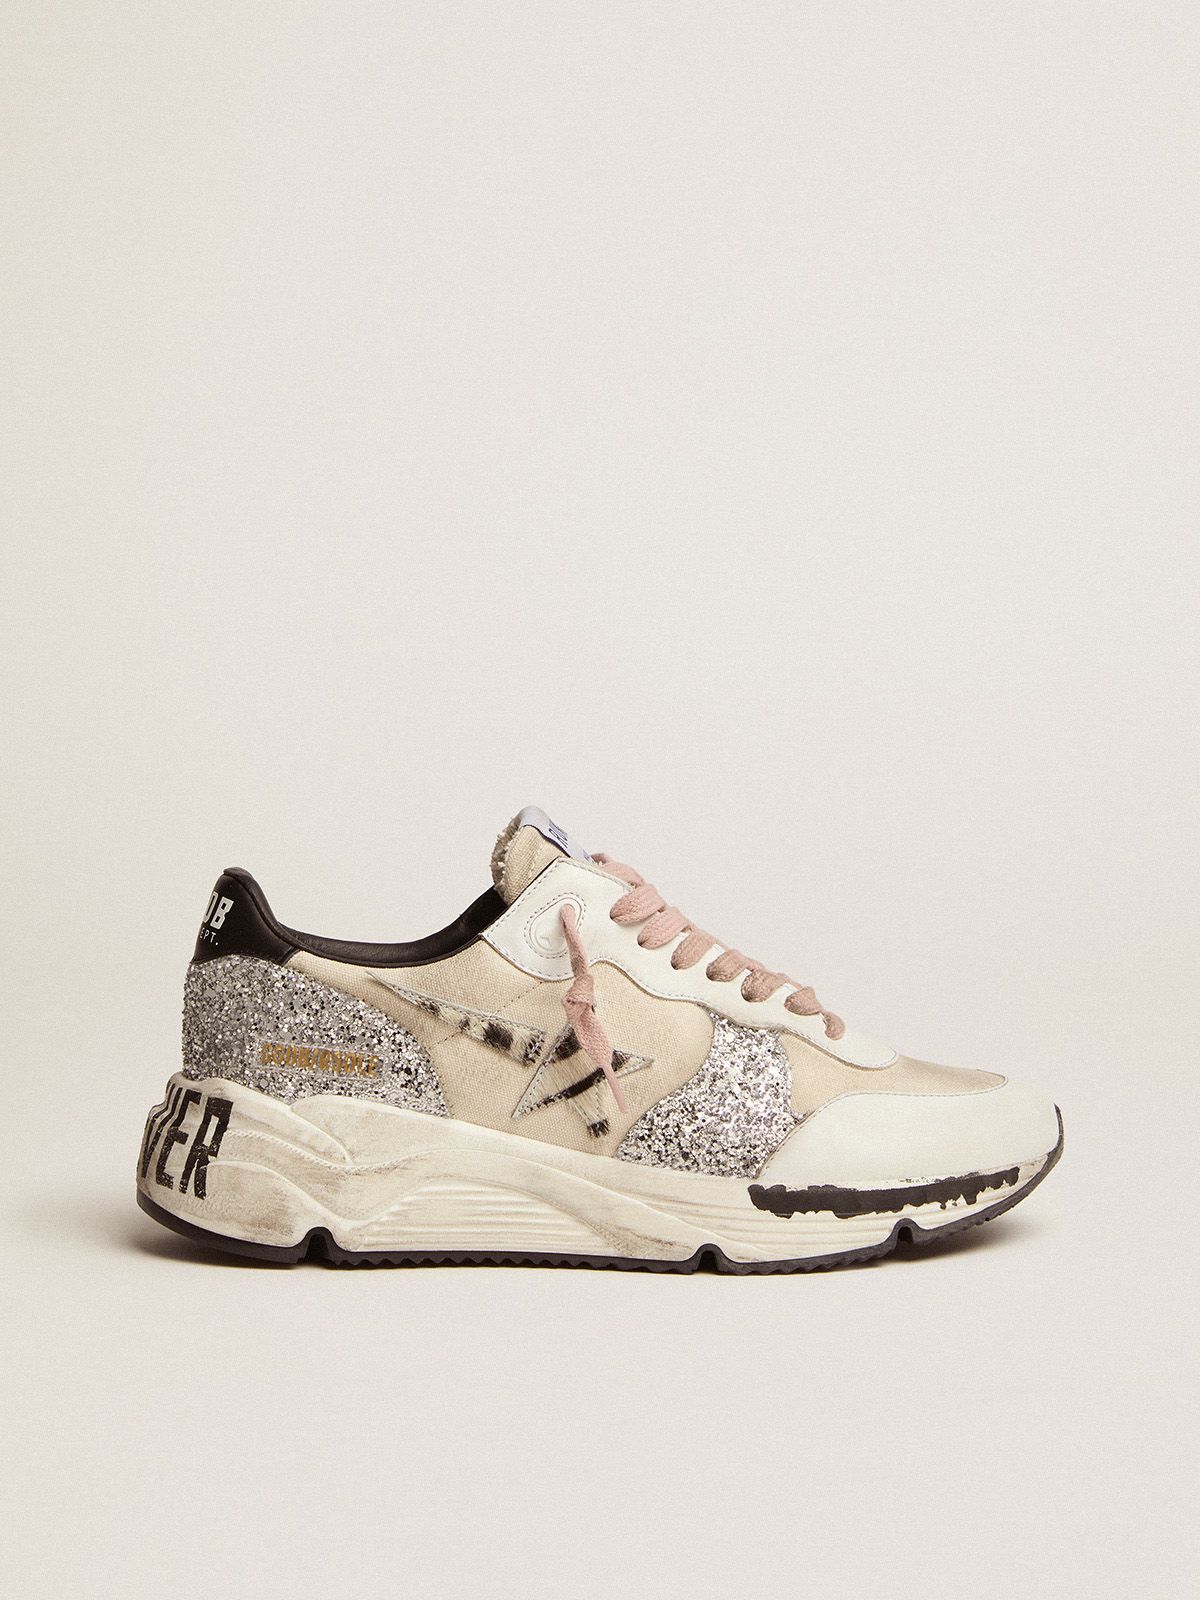 golden goose skin star and pony sneakers upper canvas with zebra-print cream Running Sole